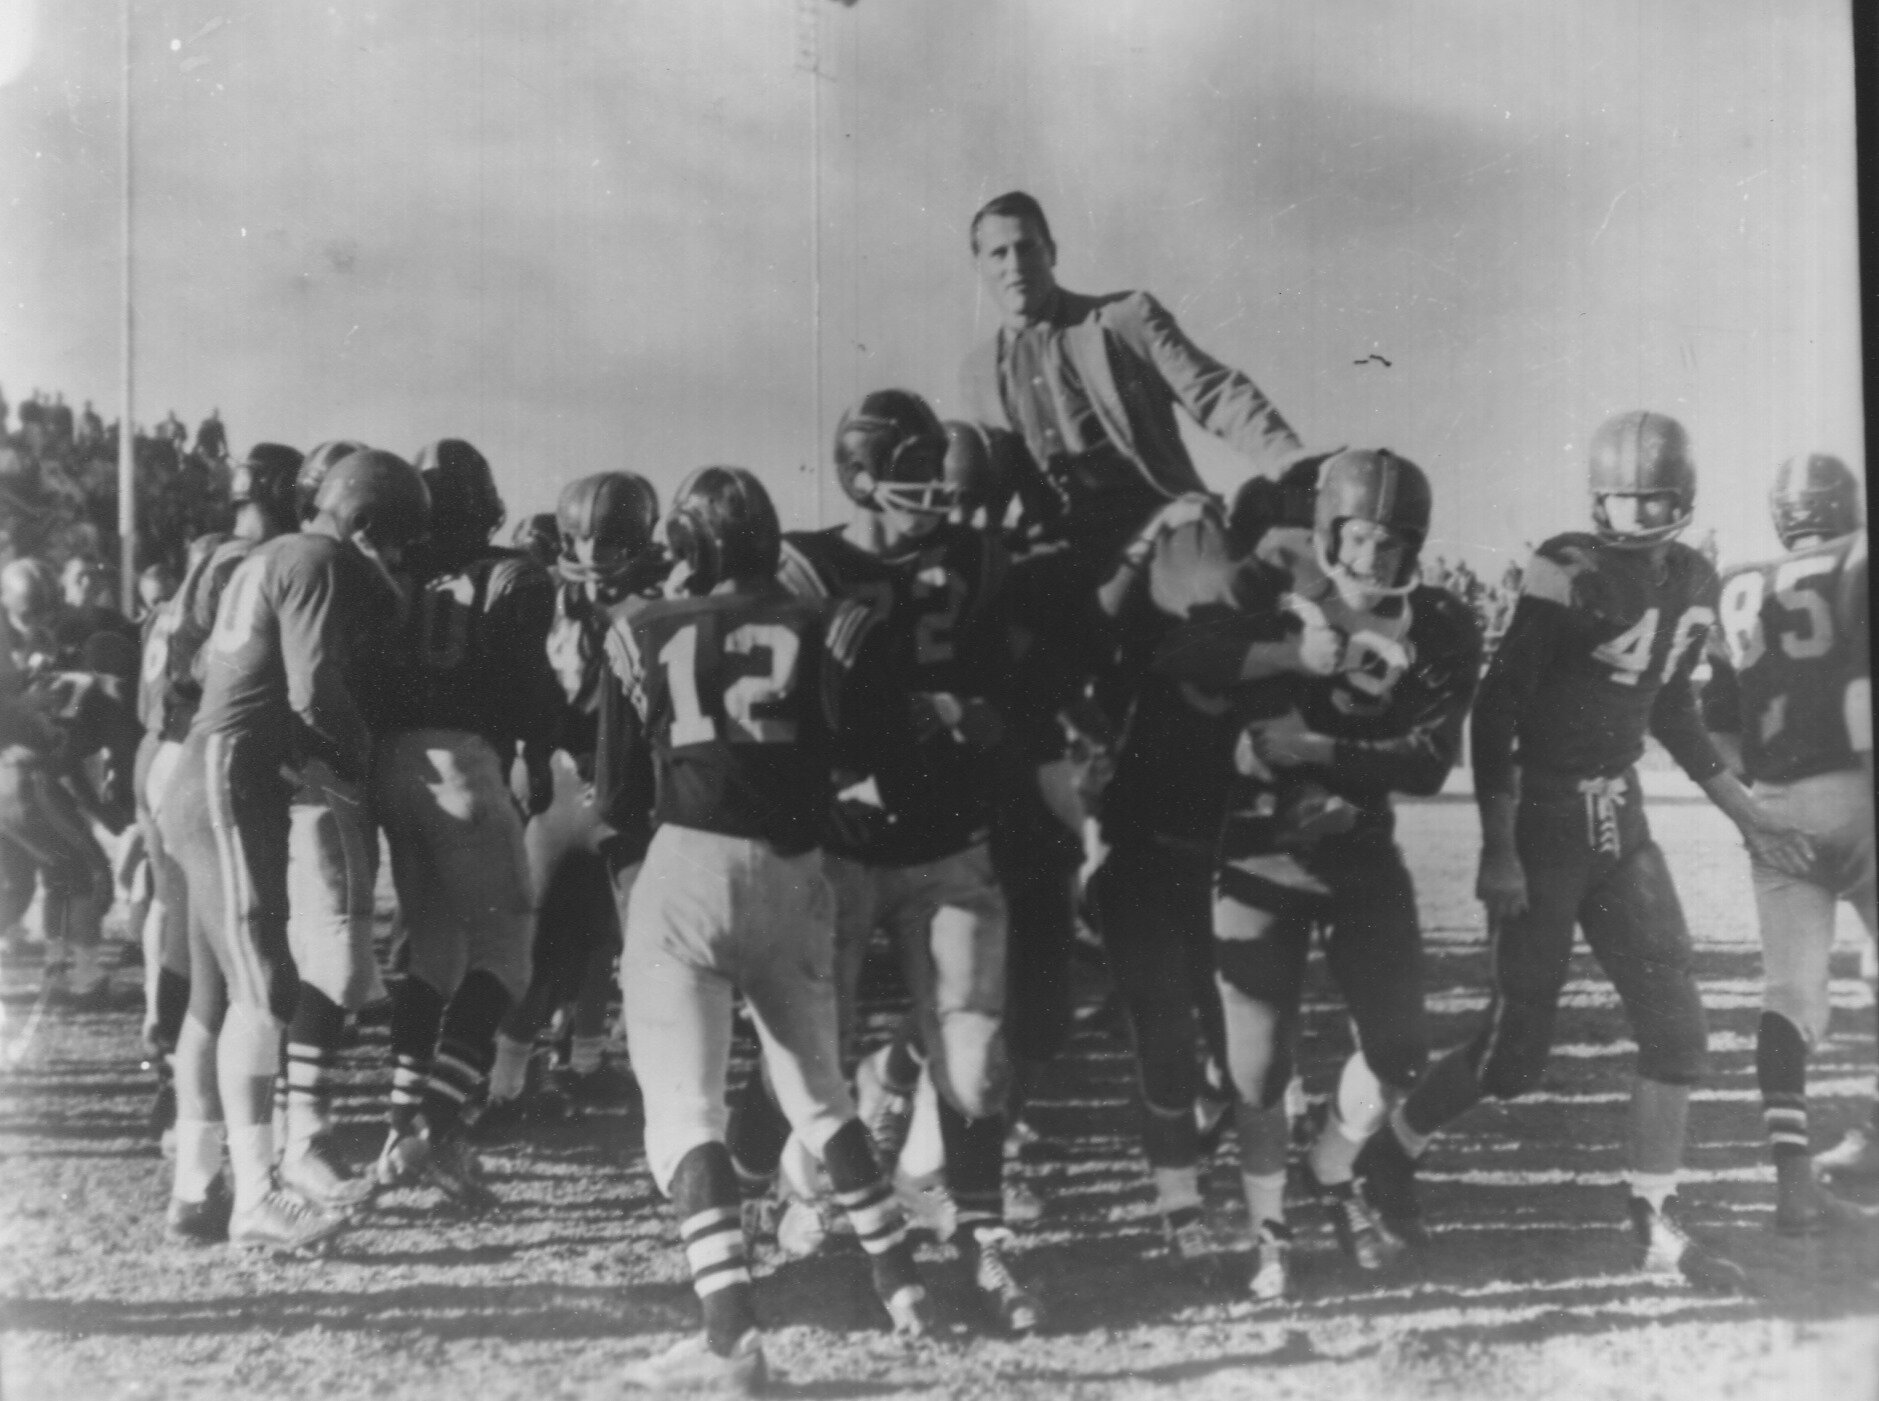  EMORY BELLARD shown being carried off the field after winning his first state title in 1958 in Breckenridge. He would tie for the title at Breckenridge the following year and a few years later win a title at San Angelo. He then went on staff at UT w